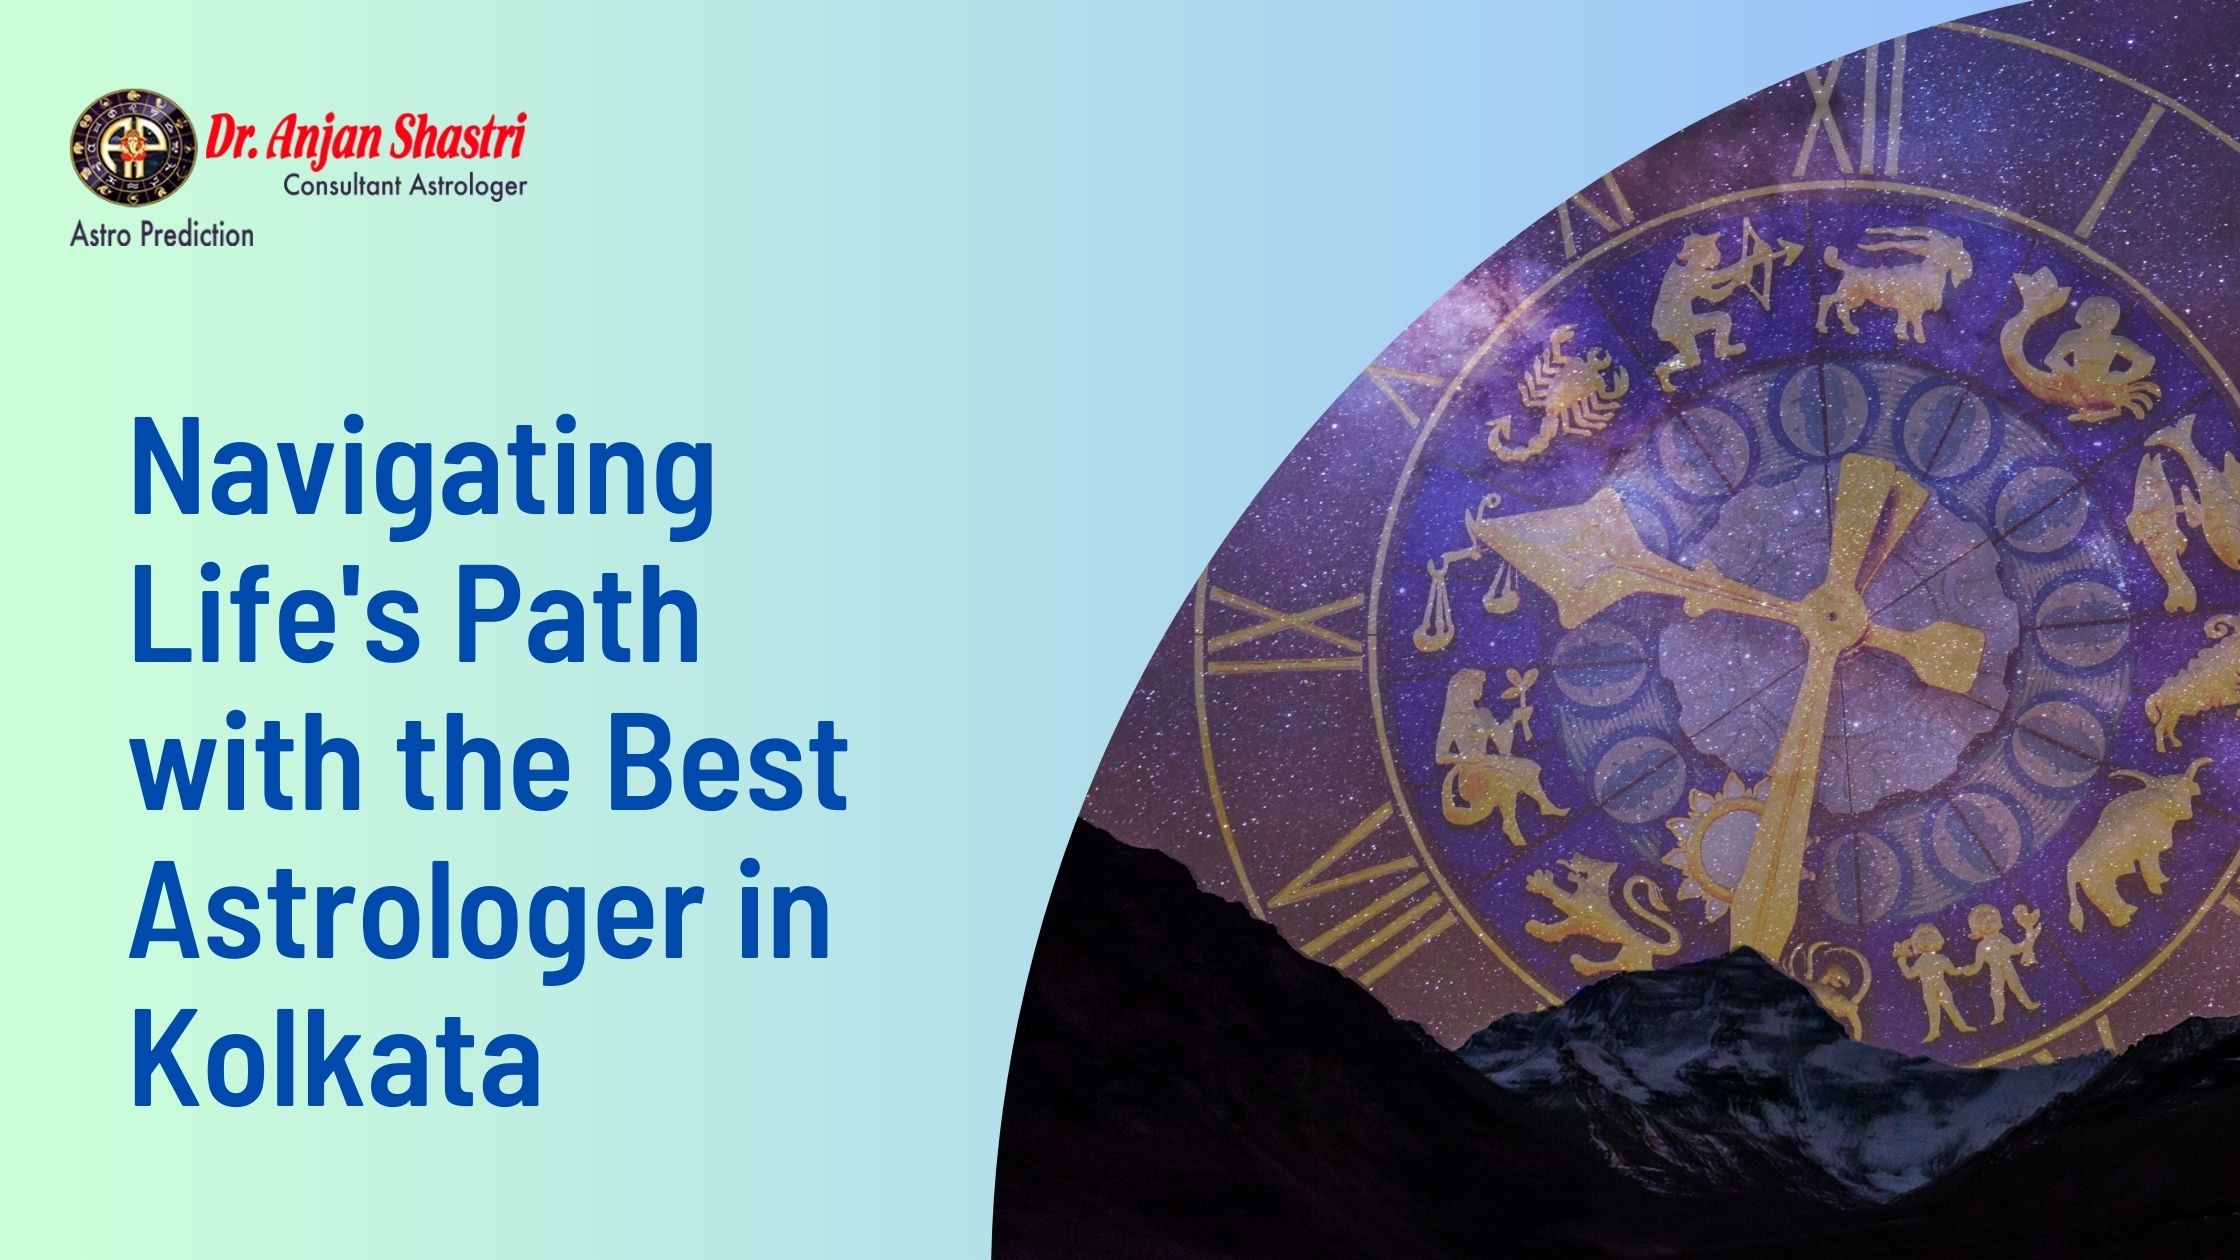 Navigating Life's Path with the Best Astrologer in Kolkata